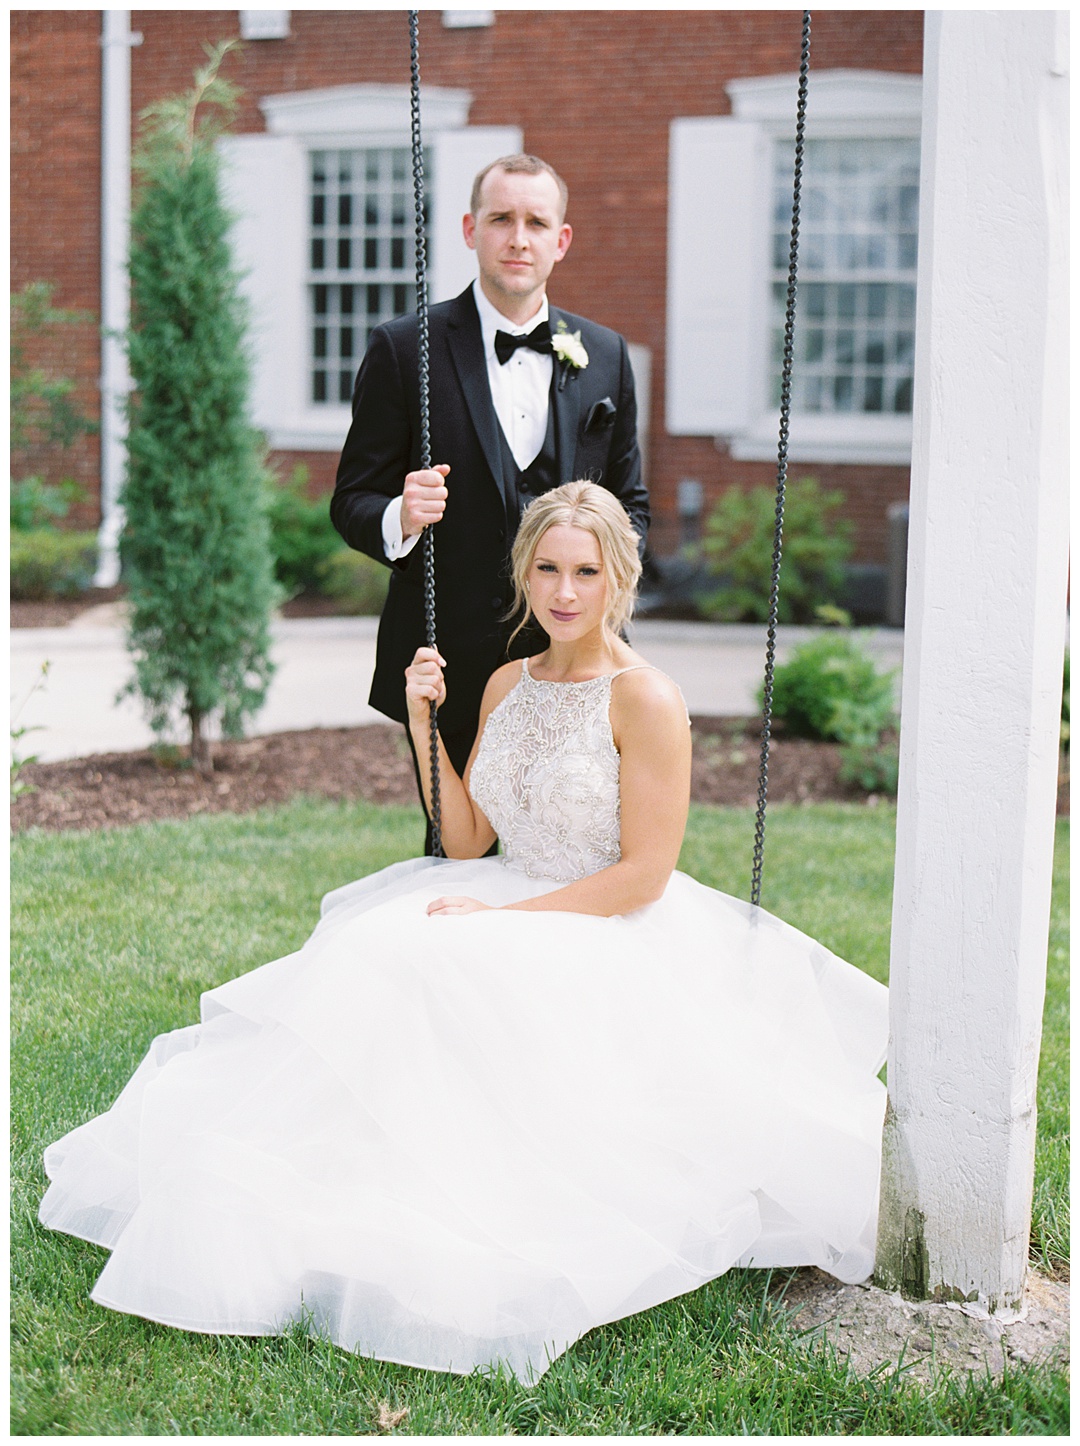 Bride and Groom Portrait Lush Backyard Wedding on Film Featured on Magnolia Rouge with Sarah Sunstrom Photography